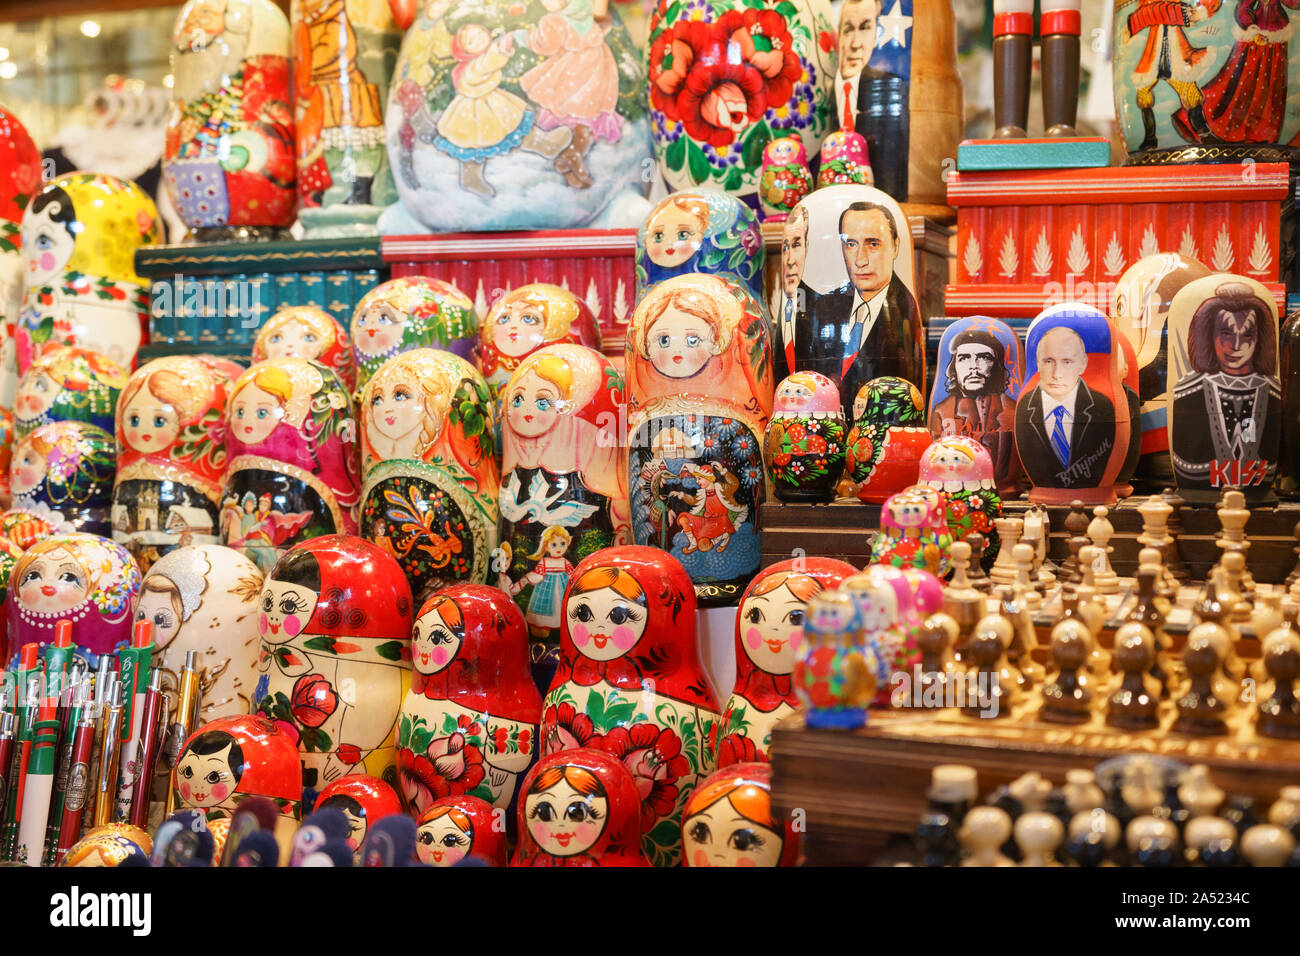 Budapest, Hungary - Oct 14, 2019: Matryoshka dolls and other souvenirs in the Central Market, Budapest, Hungary. Stock Photo